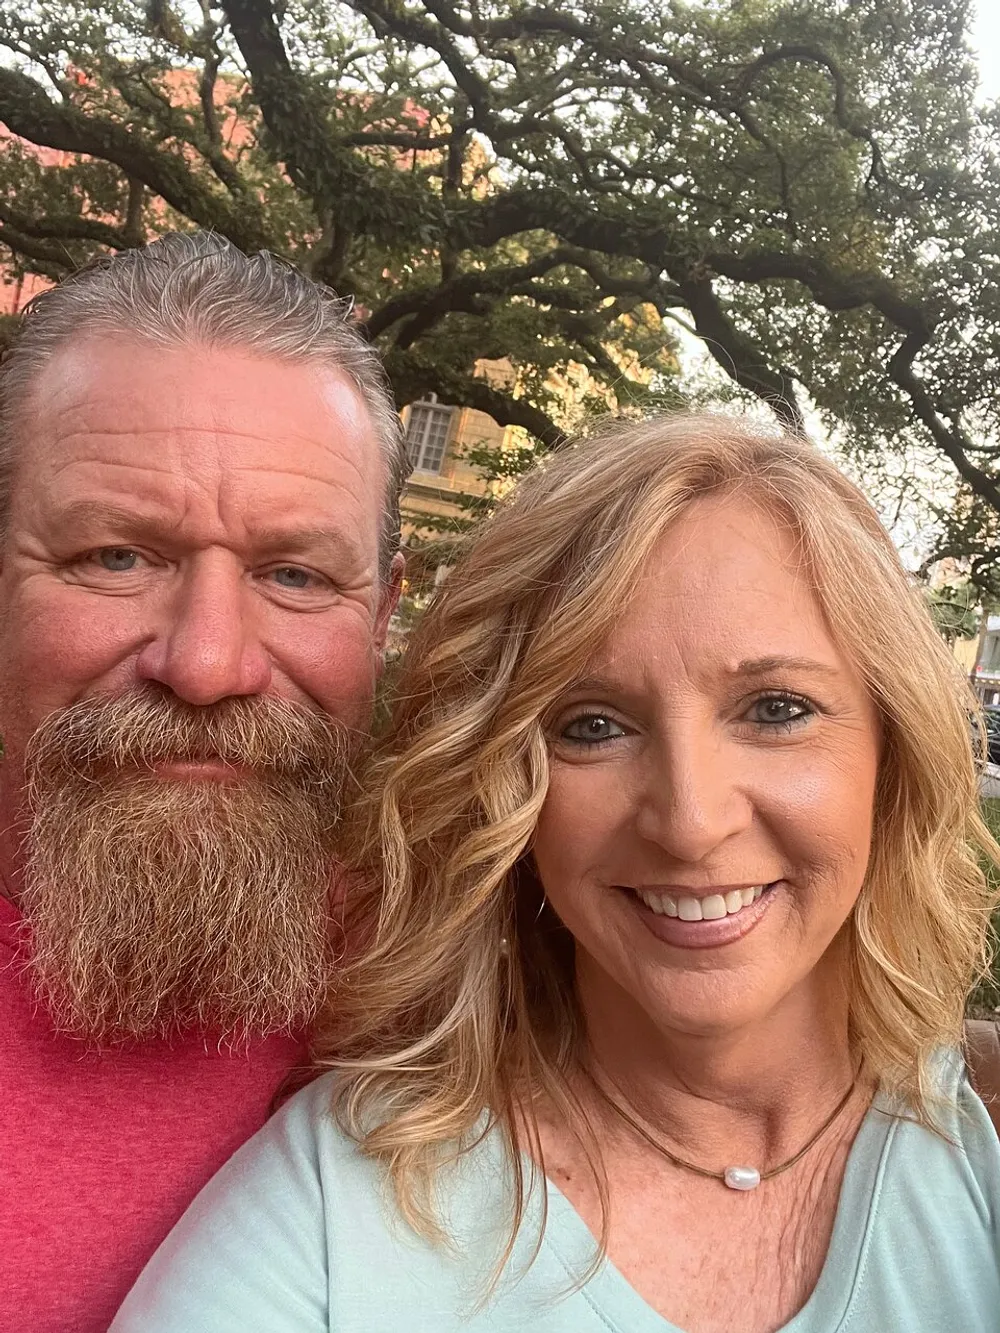 A man with a beard and a woman with blonde hair are smiling for a selfie with a large tree and buildings in the background